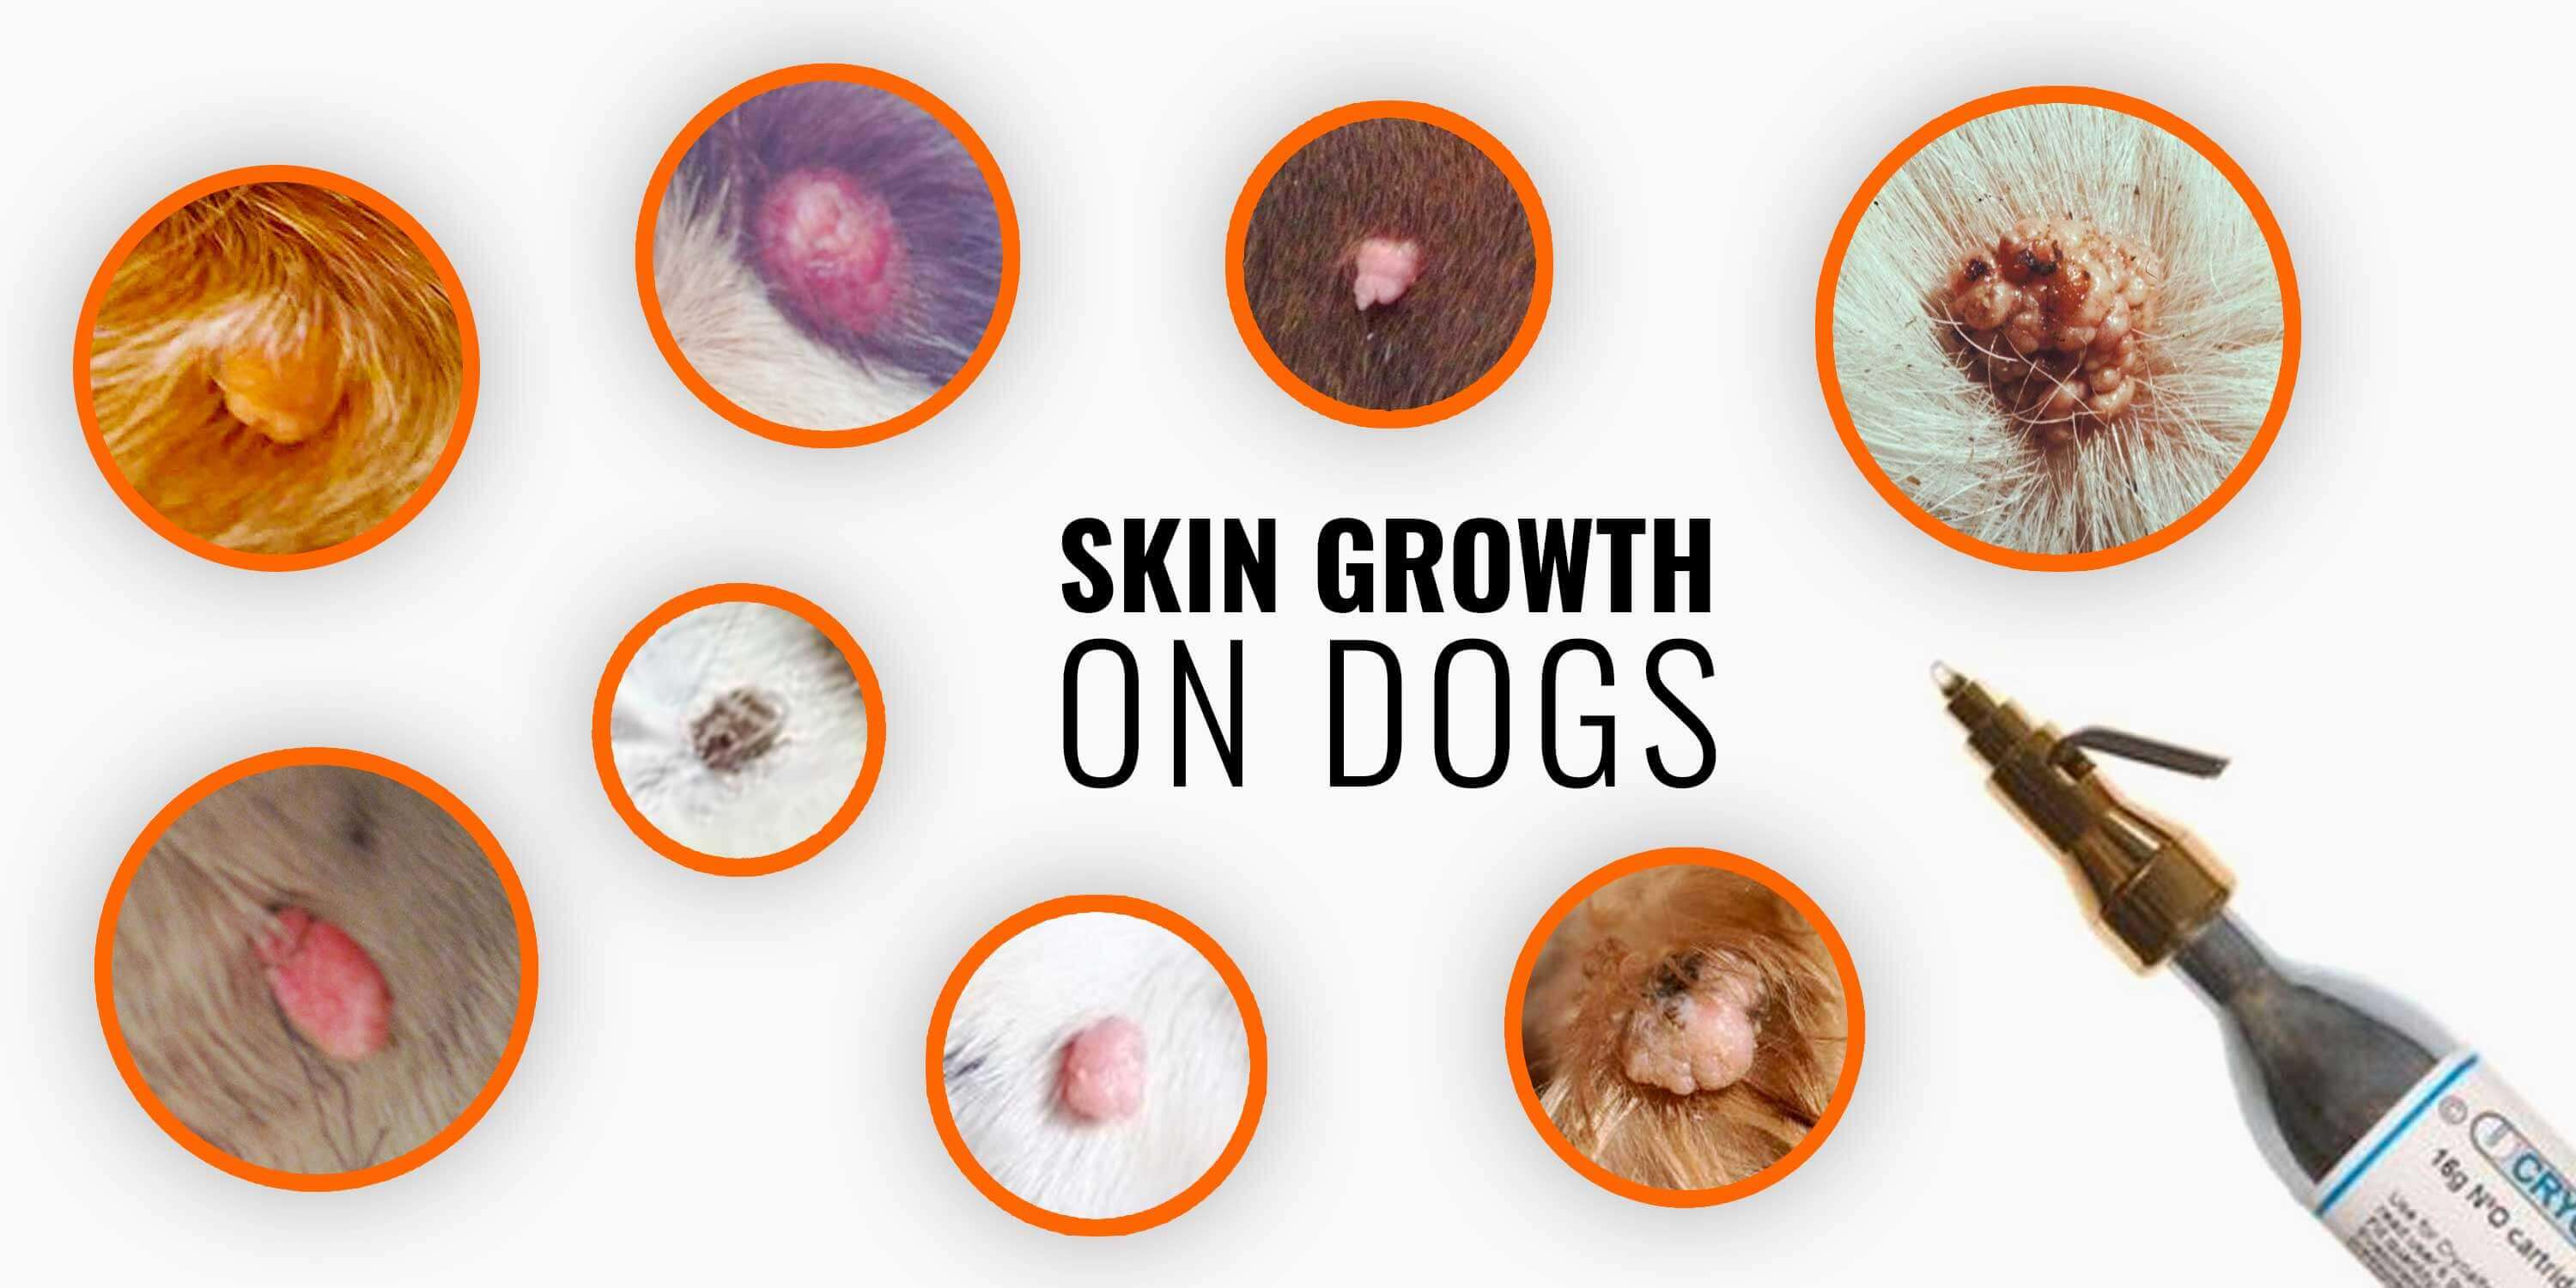 Skin Growths on Dogs - Types, Causes, Diagnosis & Treatments